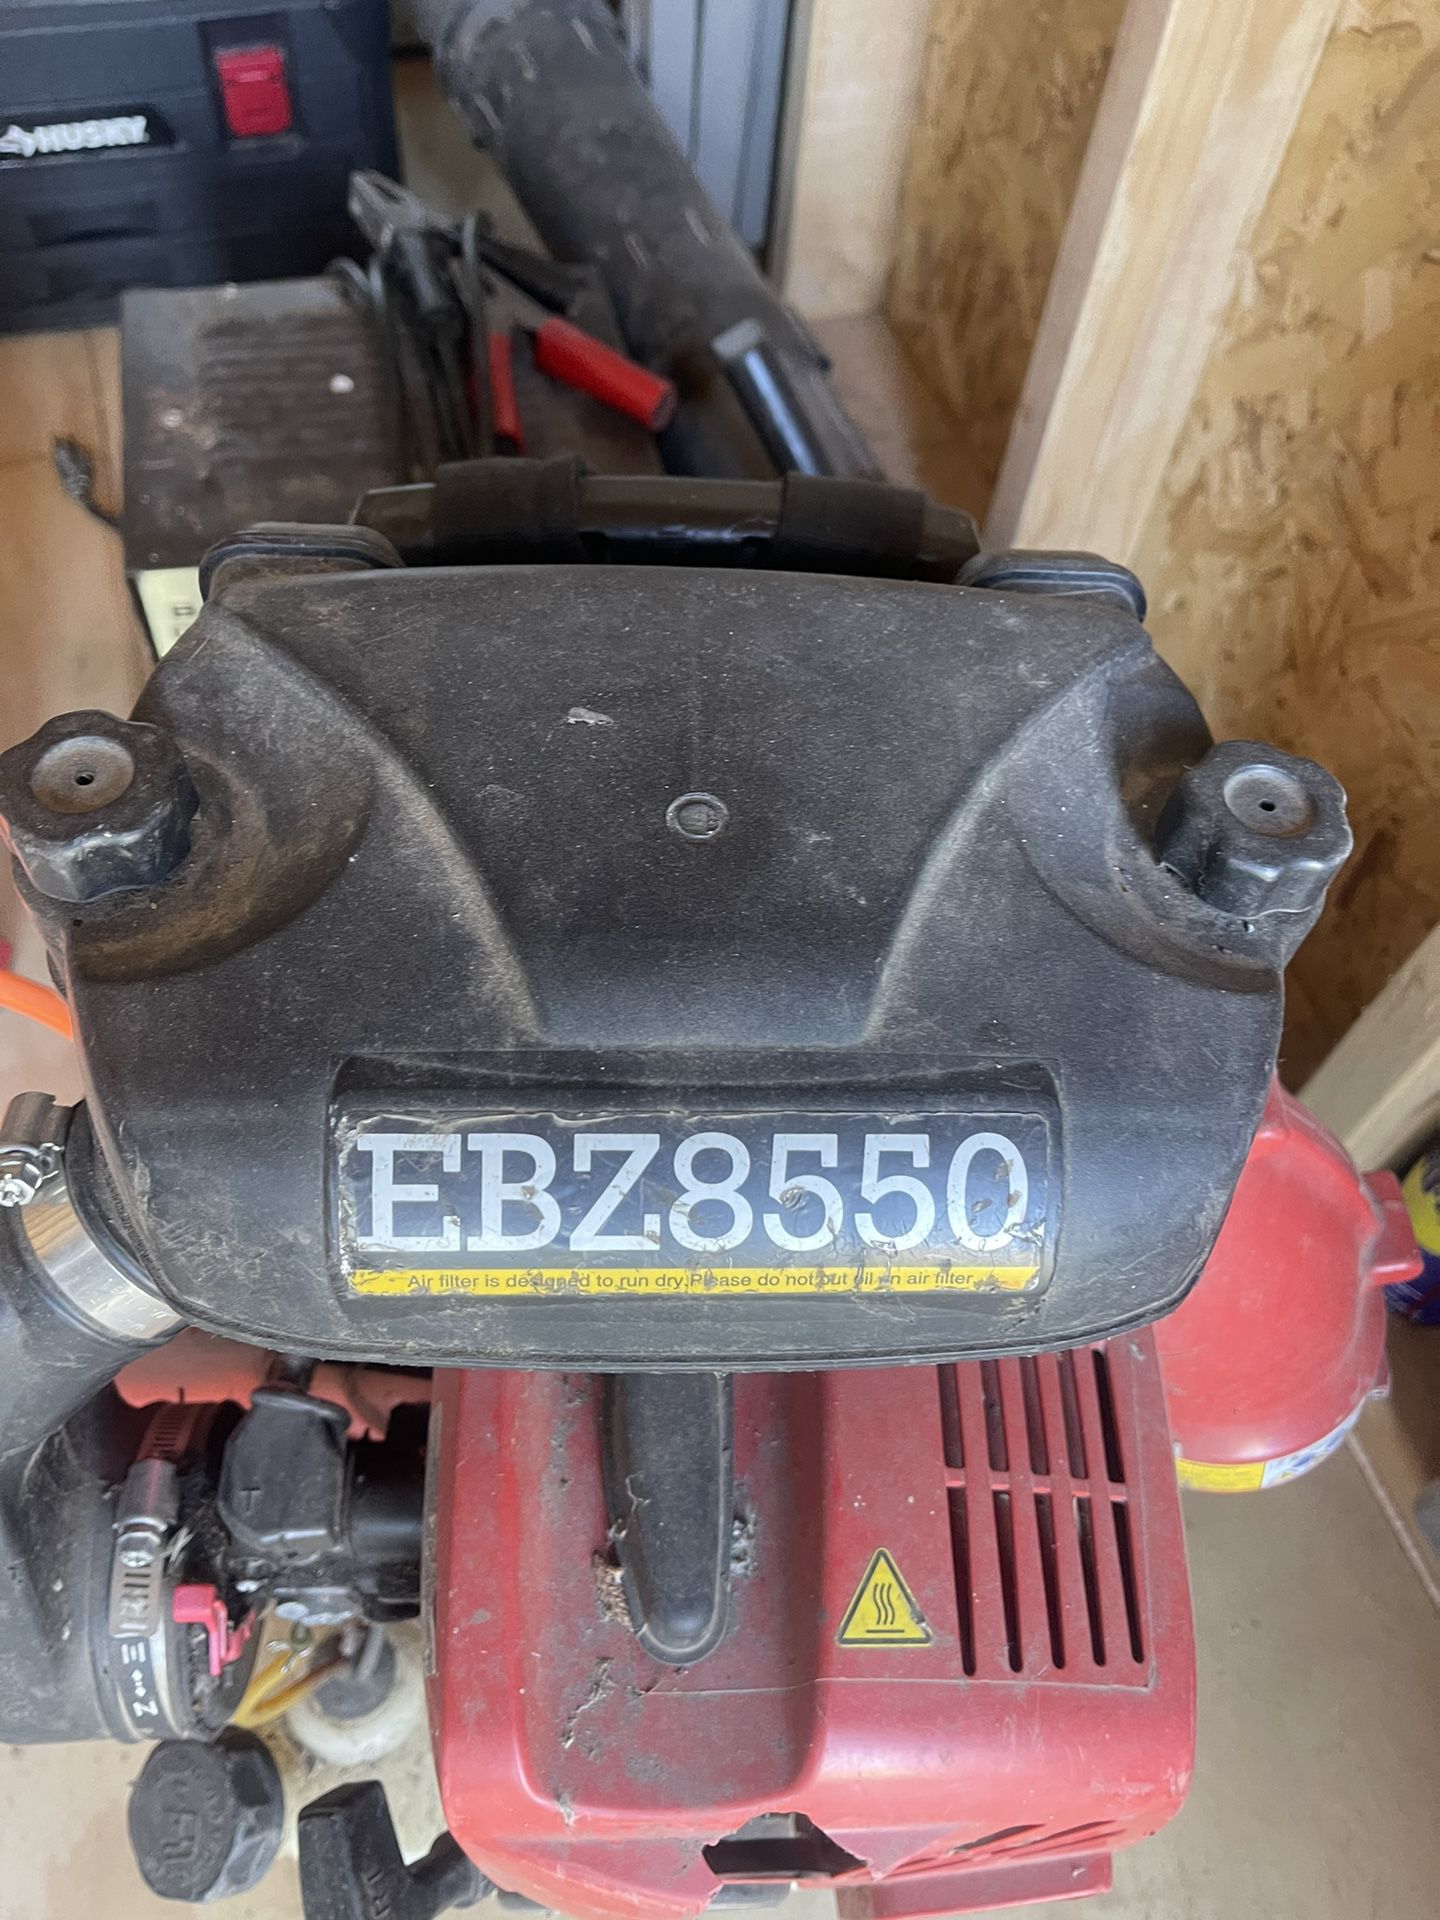 Blower For Sale Or Trade For Lawn Mower